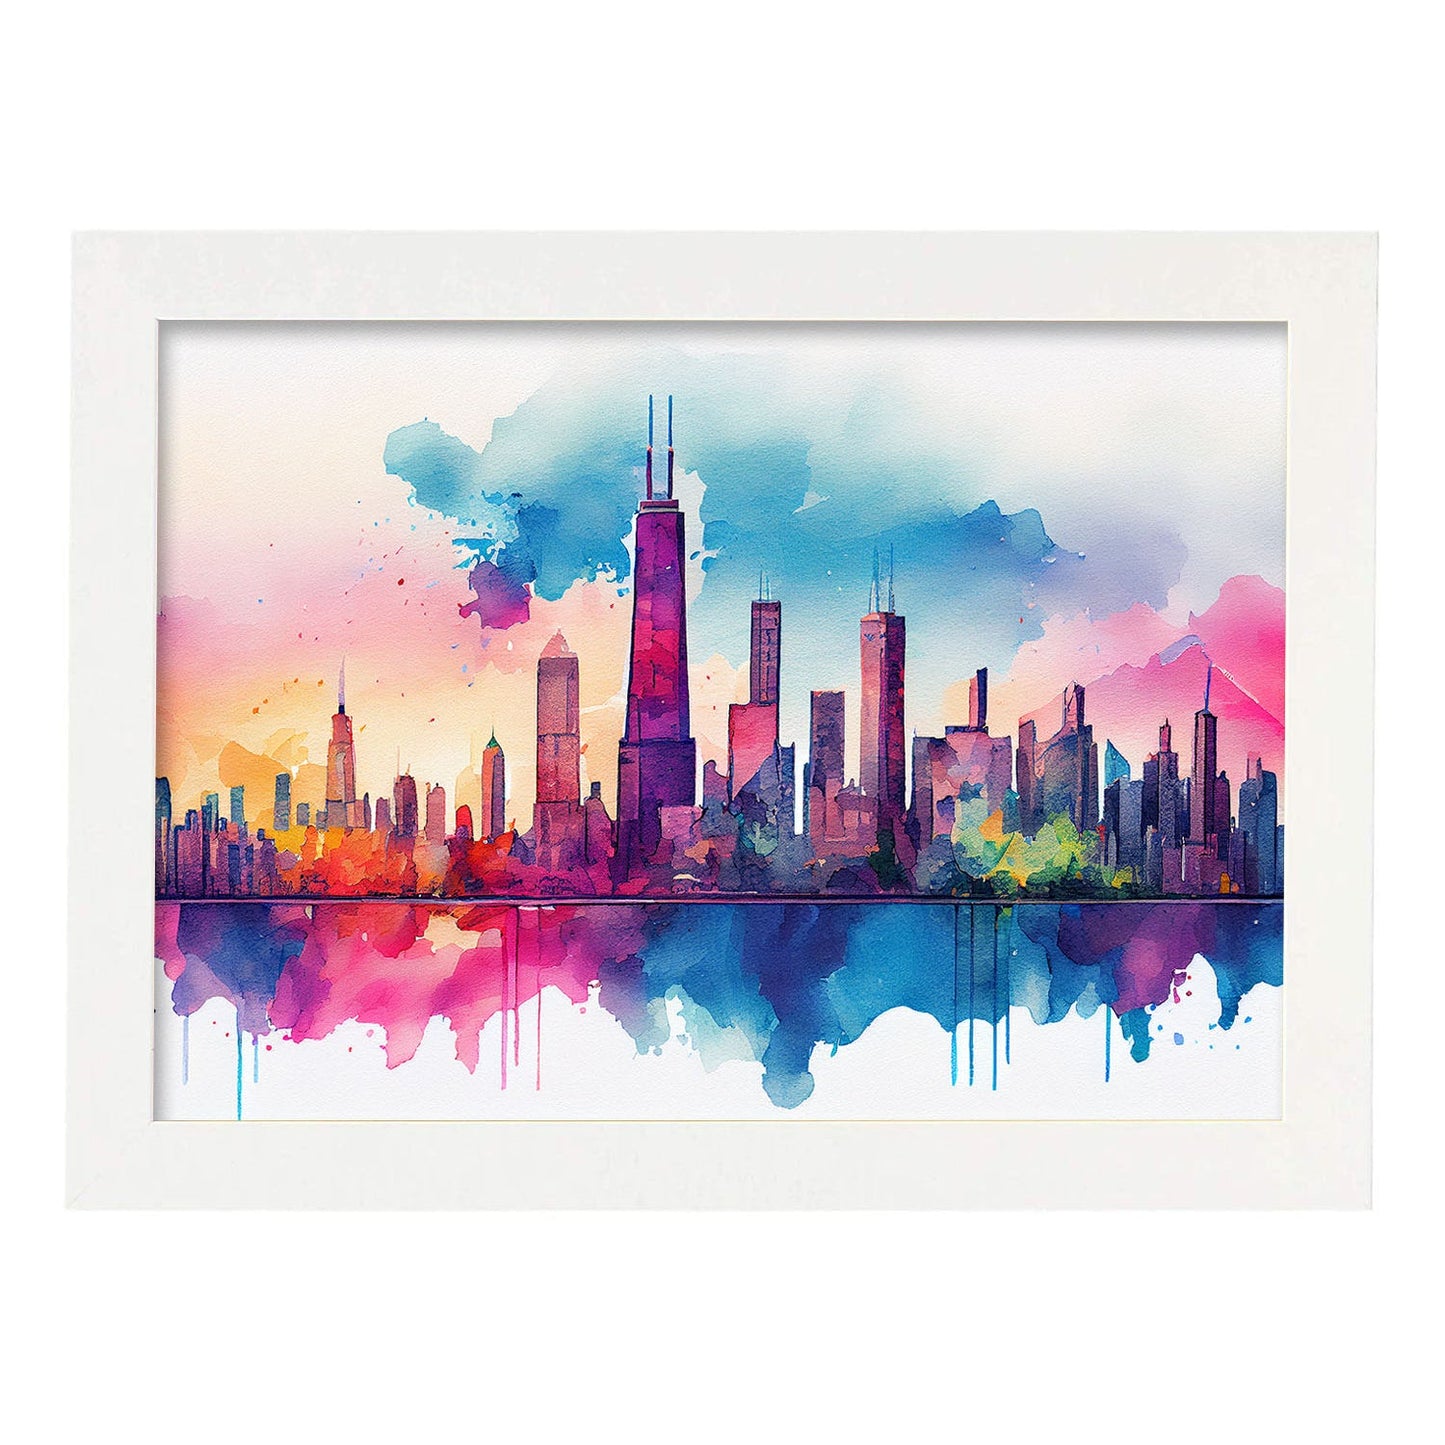 Nacnic watercolor of a skyline of the city of Chicago. Aesthetic Wall Art Prints for Bedroom or Living Room Design.-Artwork-Nacnic-A4-Marco Blanco-Nacnic Estudio SL